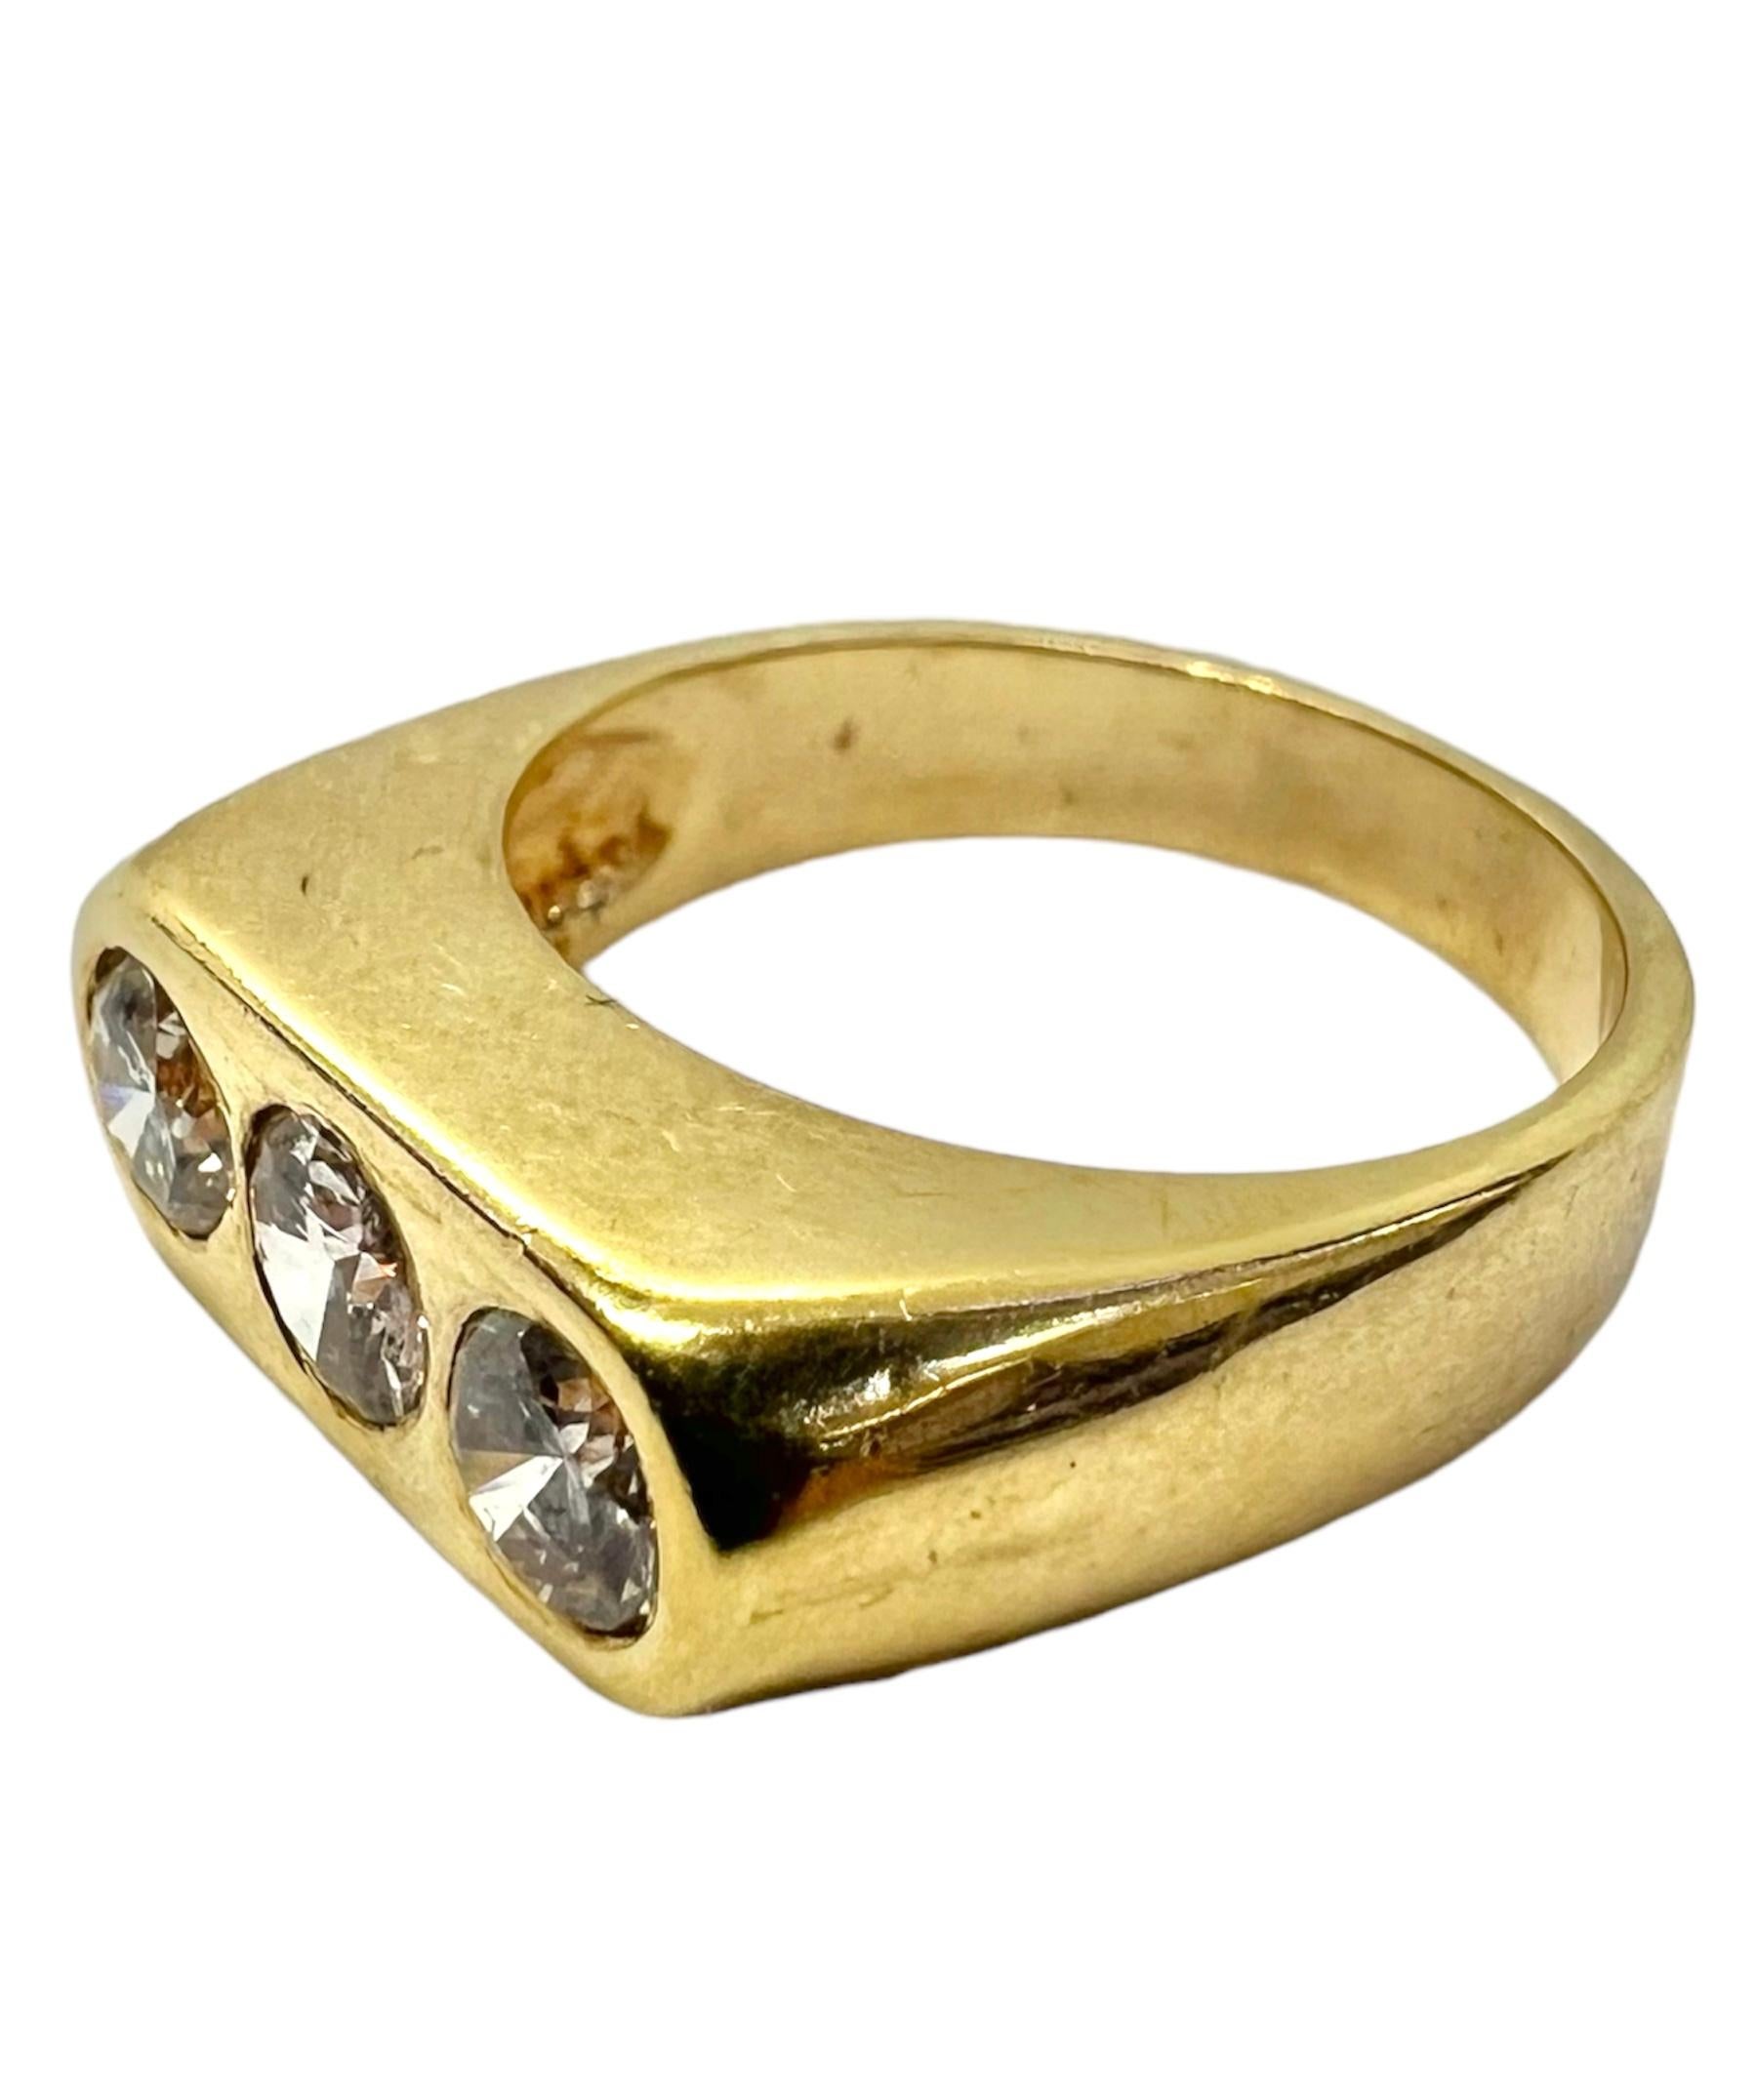 14K yellow gold ring with 3 round diamonds.

Sophia D by Joseph Dardashti LTD has been known worldwide for 35 years and are inspired by classic Art Deco design that merges with modern manufacturing techniques. 